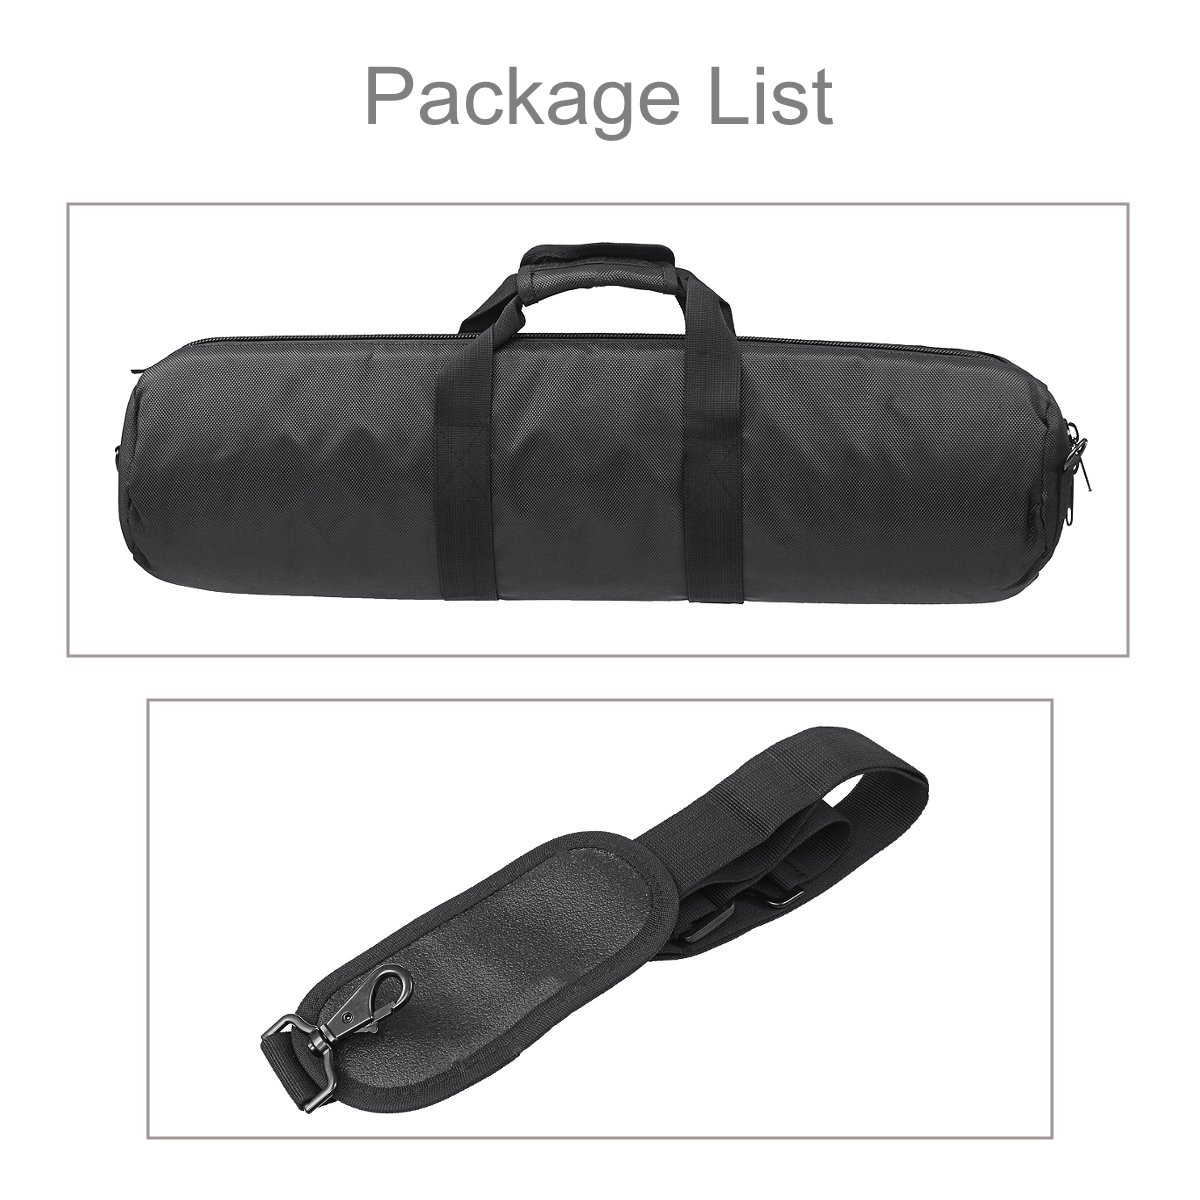 607080cm-Camera-Tripod-Storage-Bag-Travel-Carry-Case-Photography-Accessories-1526351-10